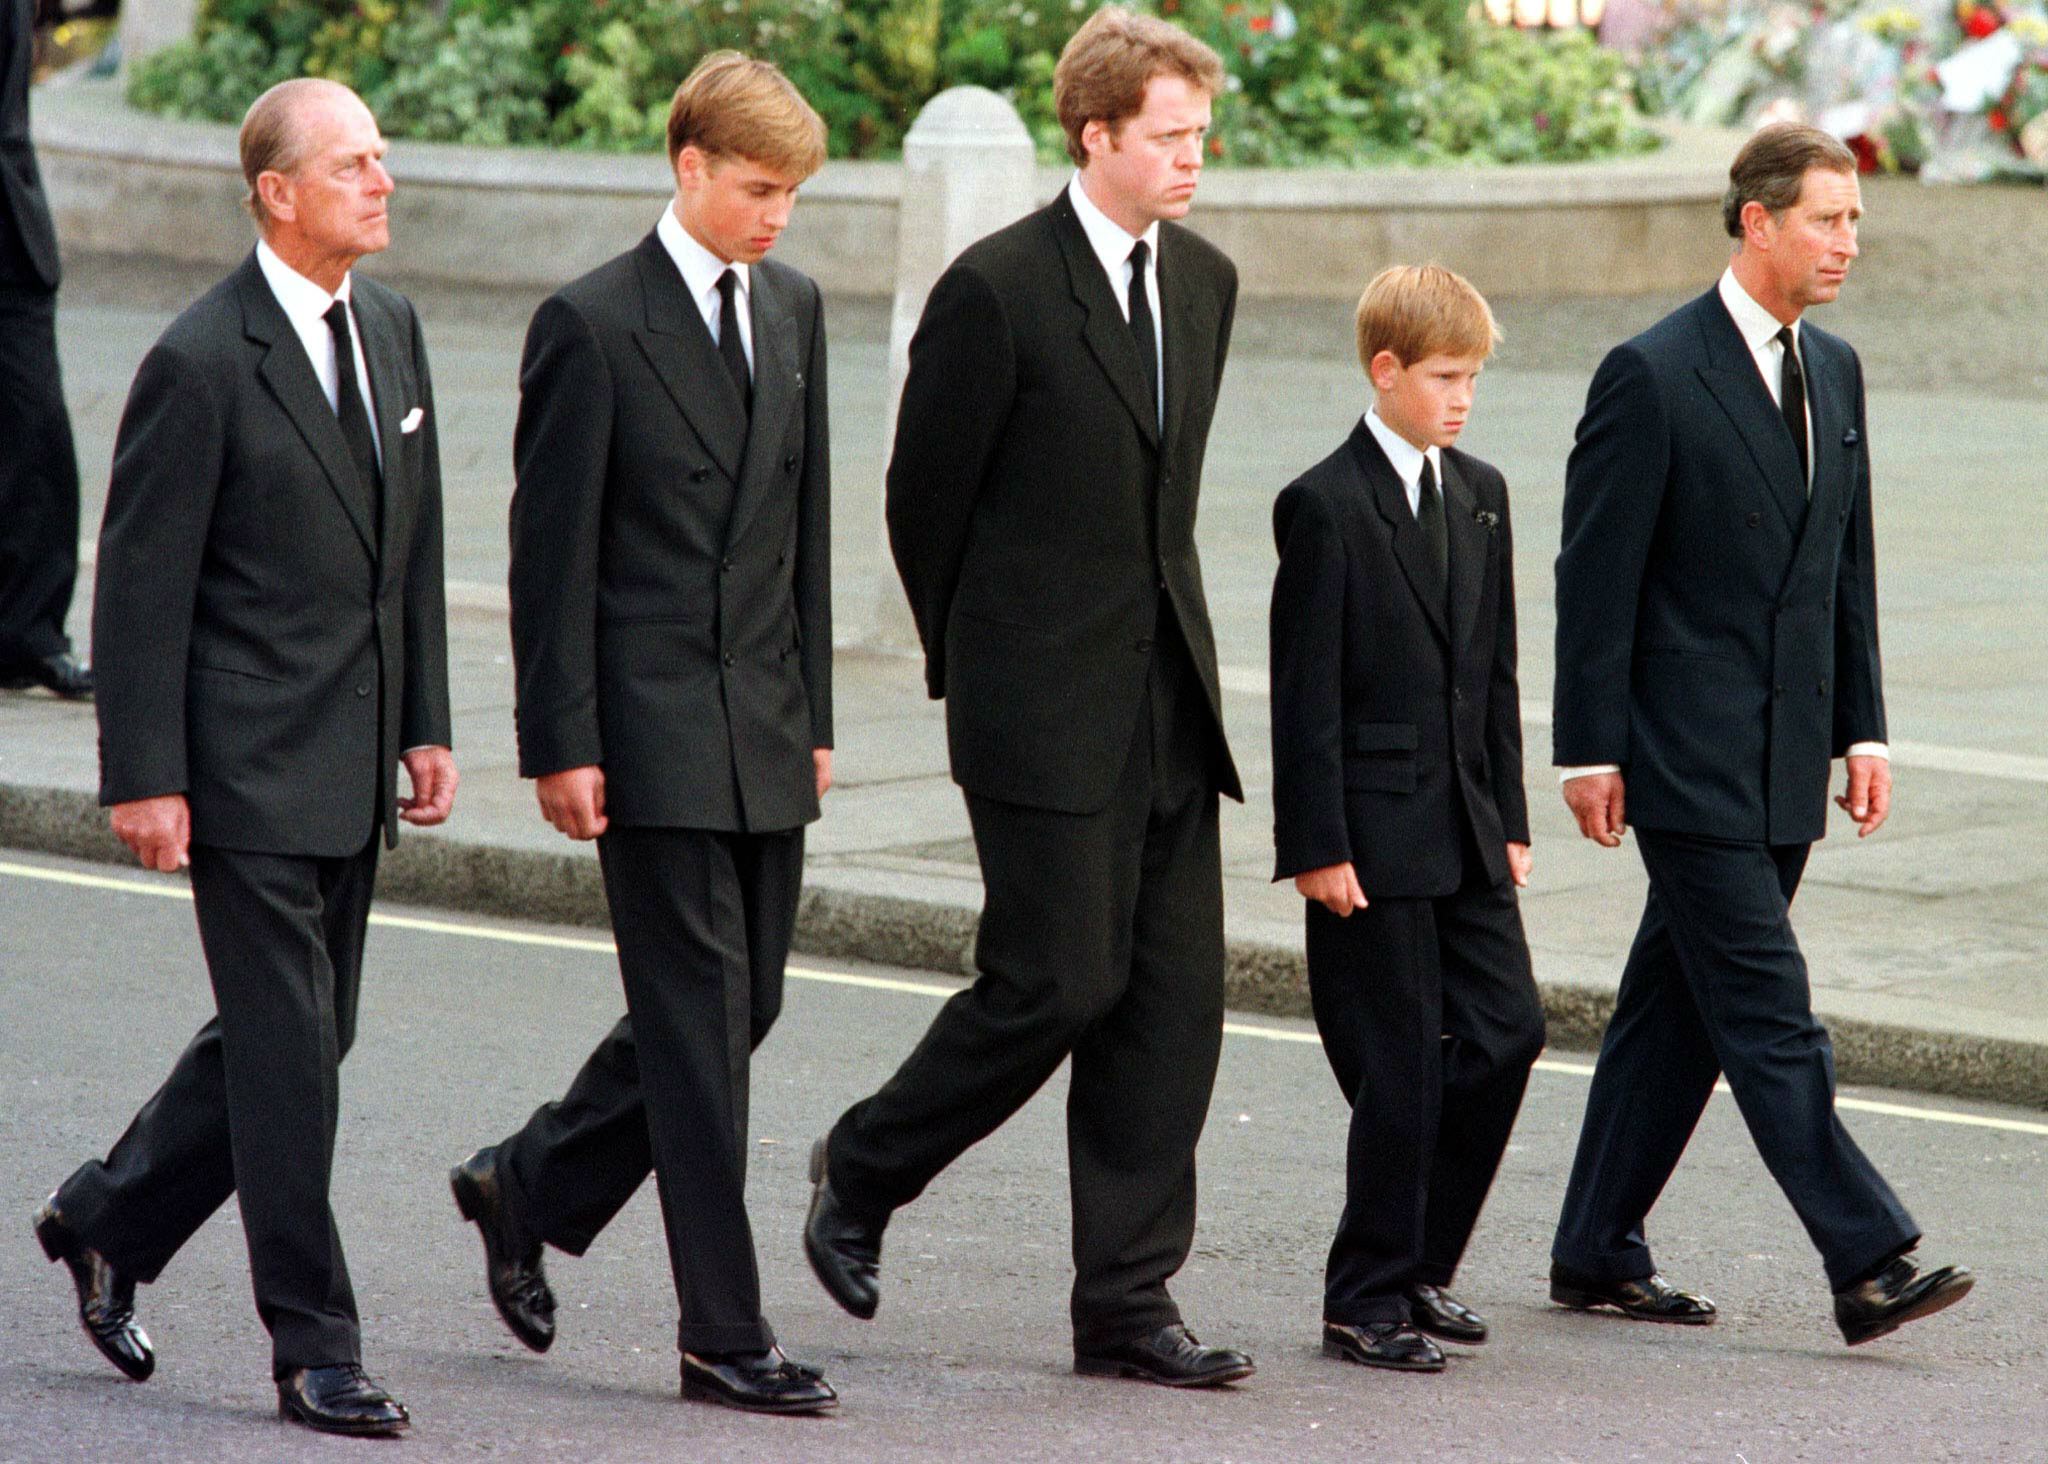 The Duke of Edinburgh, Prince William, Earl Spencer, Prince Harry and Prince Charles walk outside Westminster Abbey during the funeral service for Diana, Princess of Wales on 06 September 1997 | Source: Getty Images